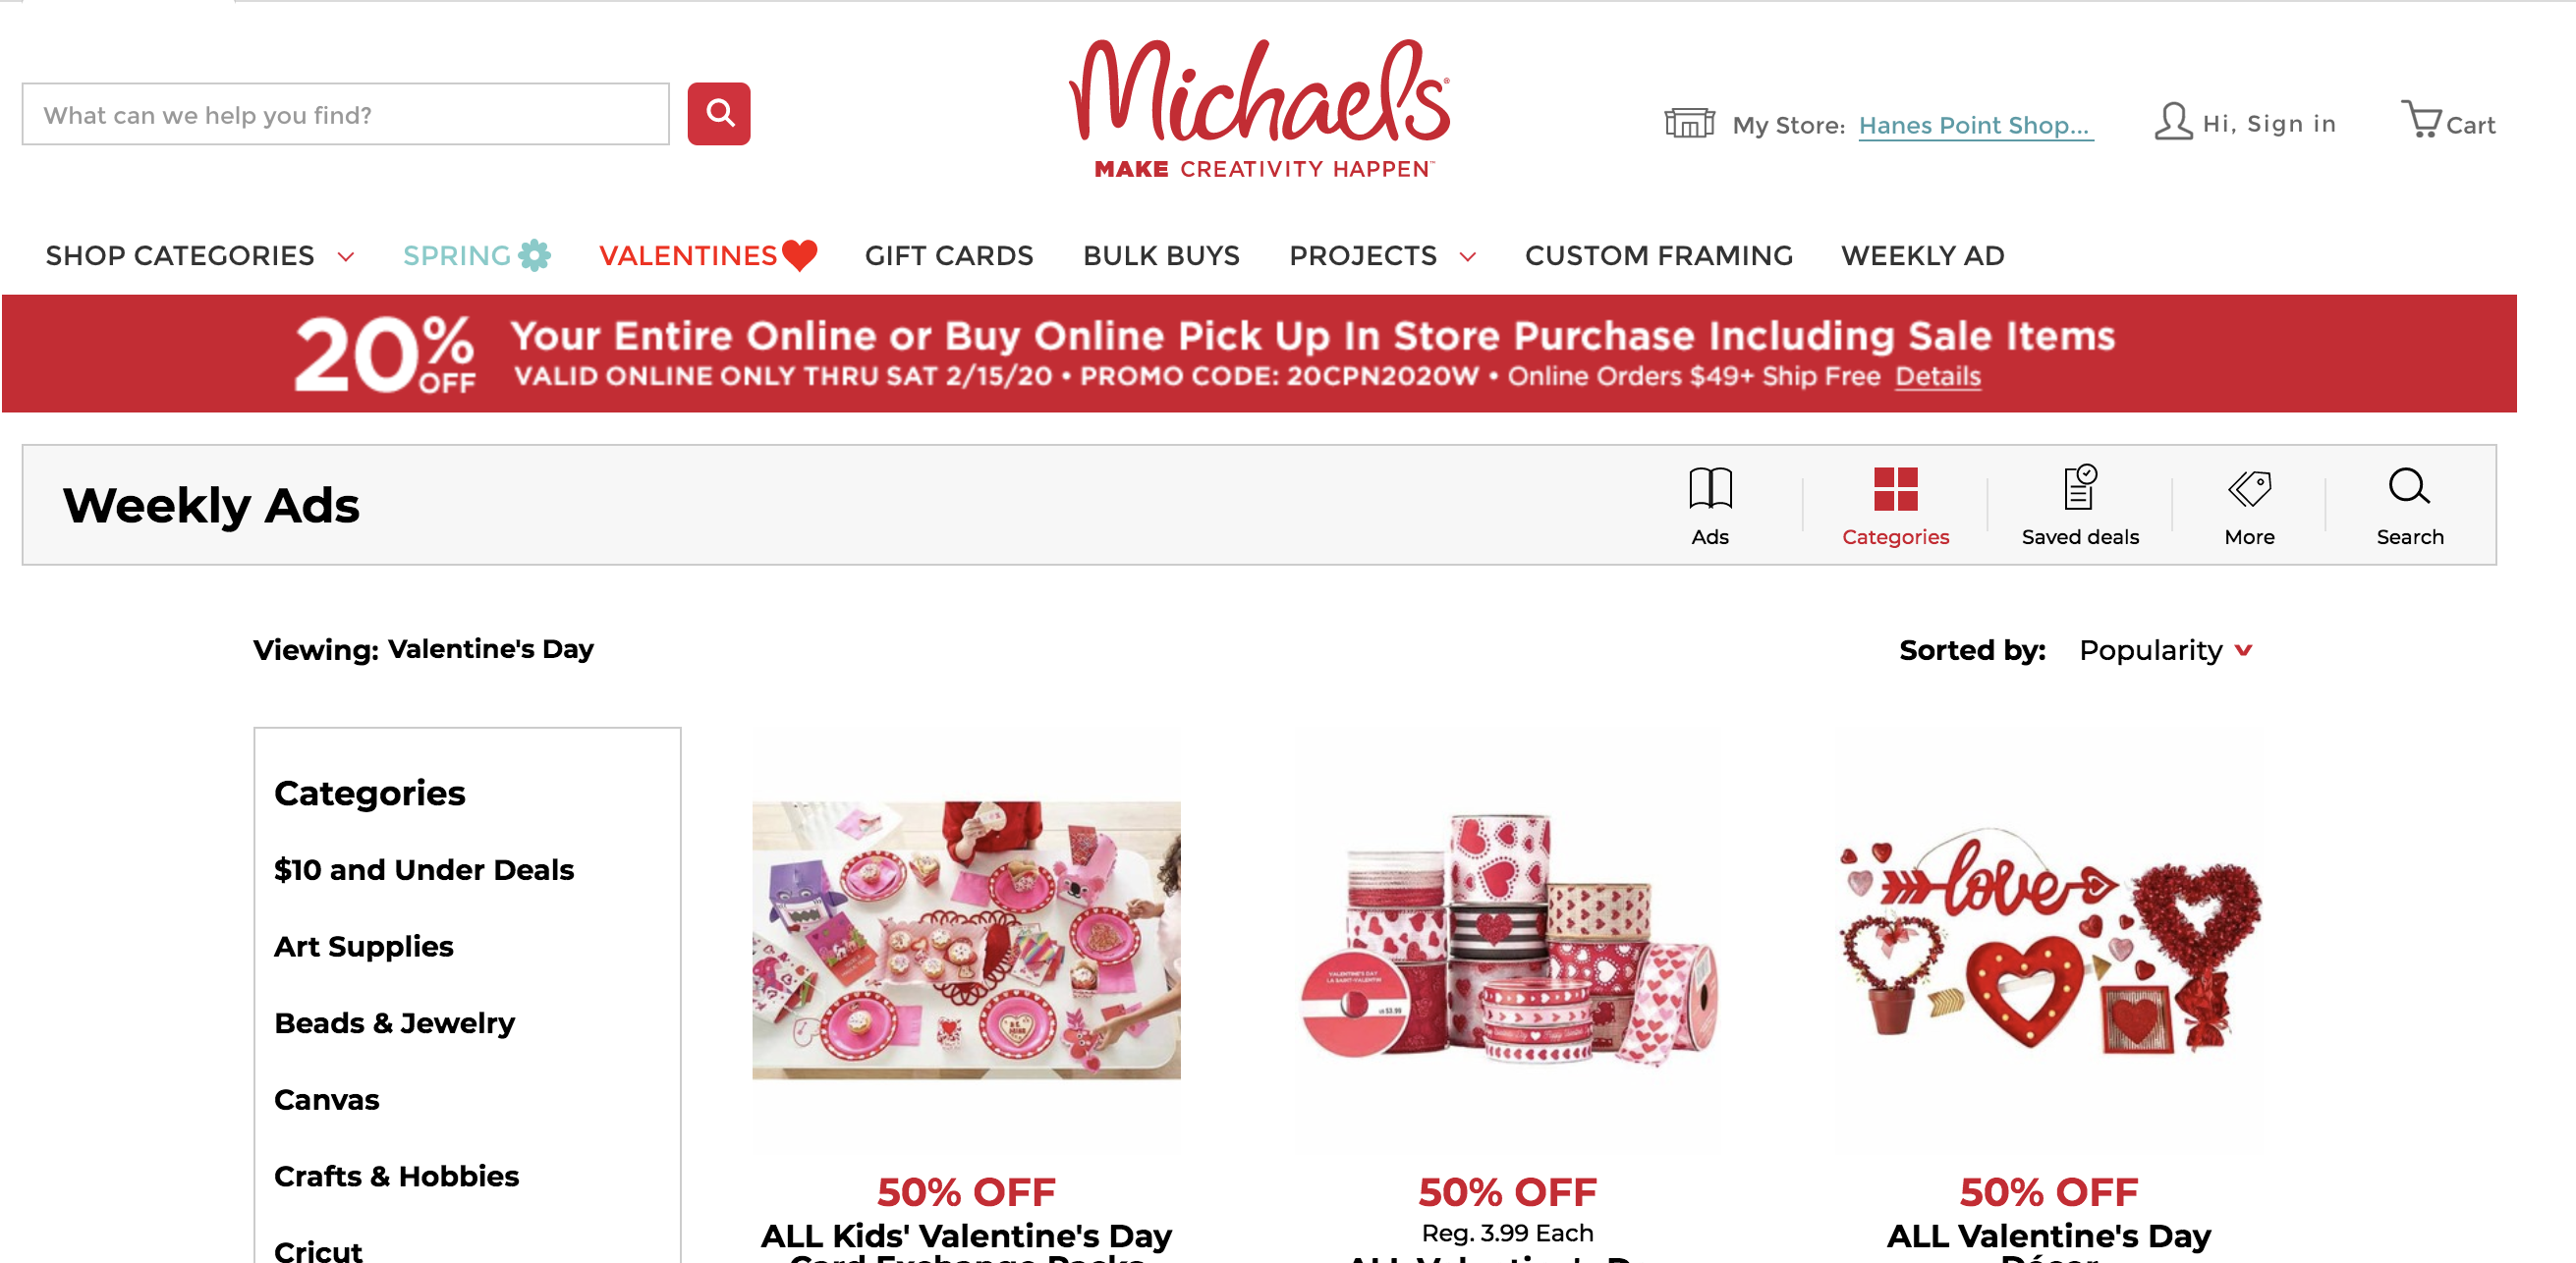 Michaels Near Me - coupon code and discount codes for Valentine's Day crafts and decorations 